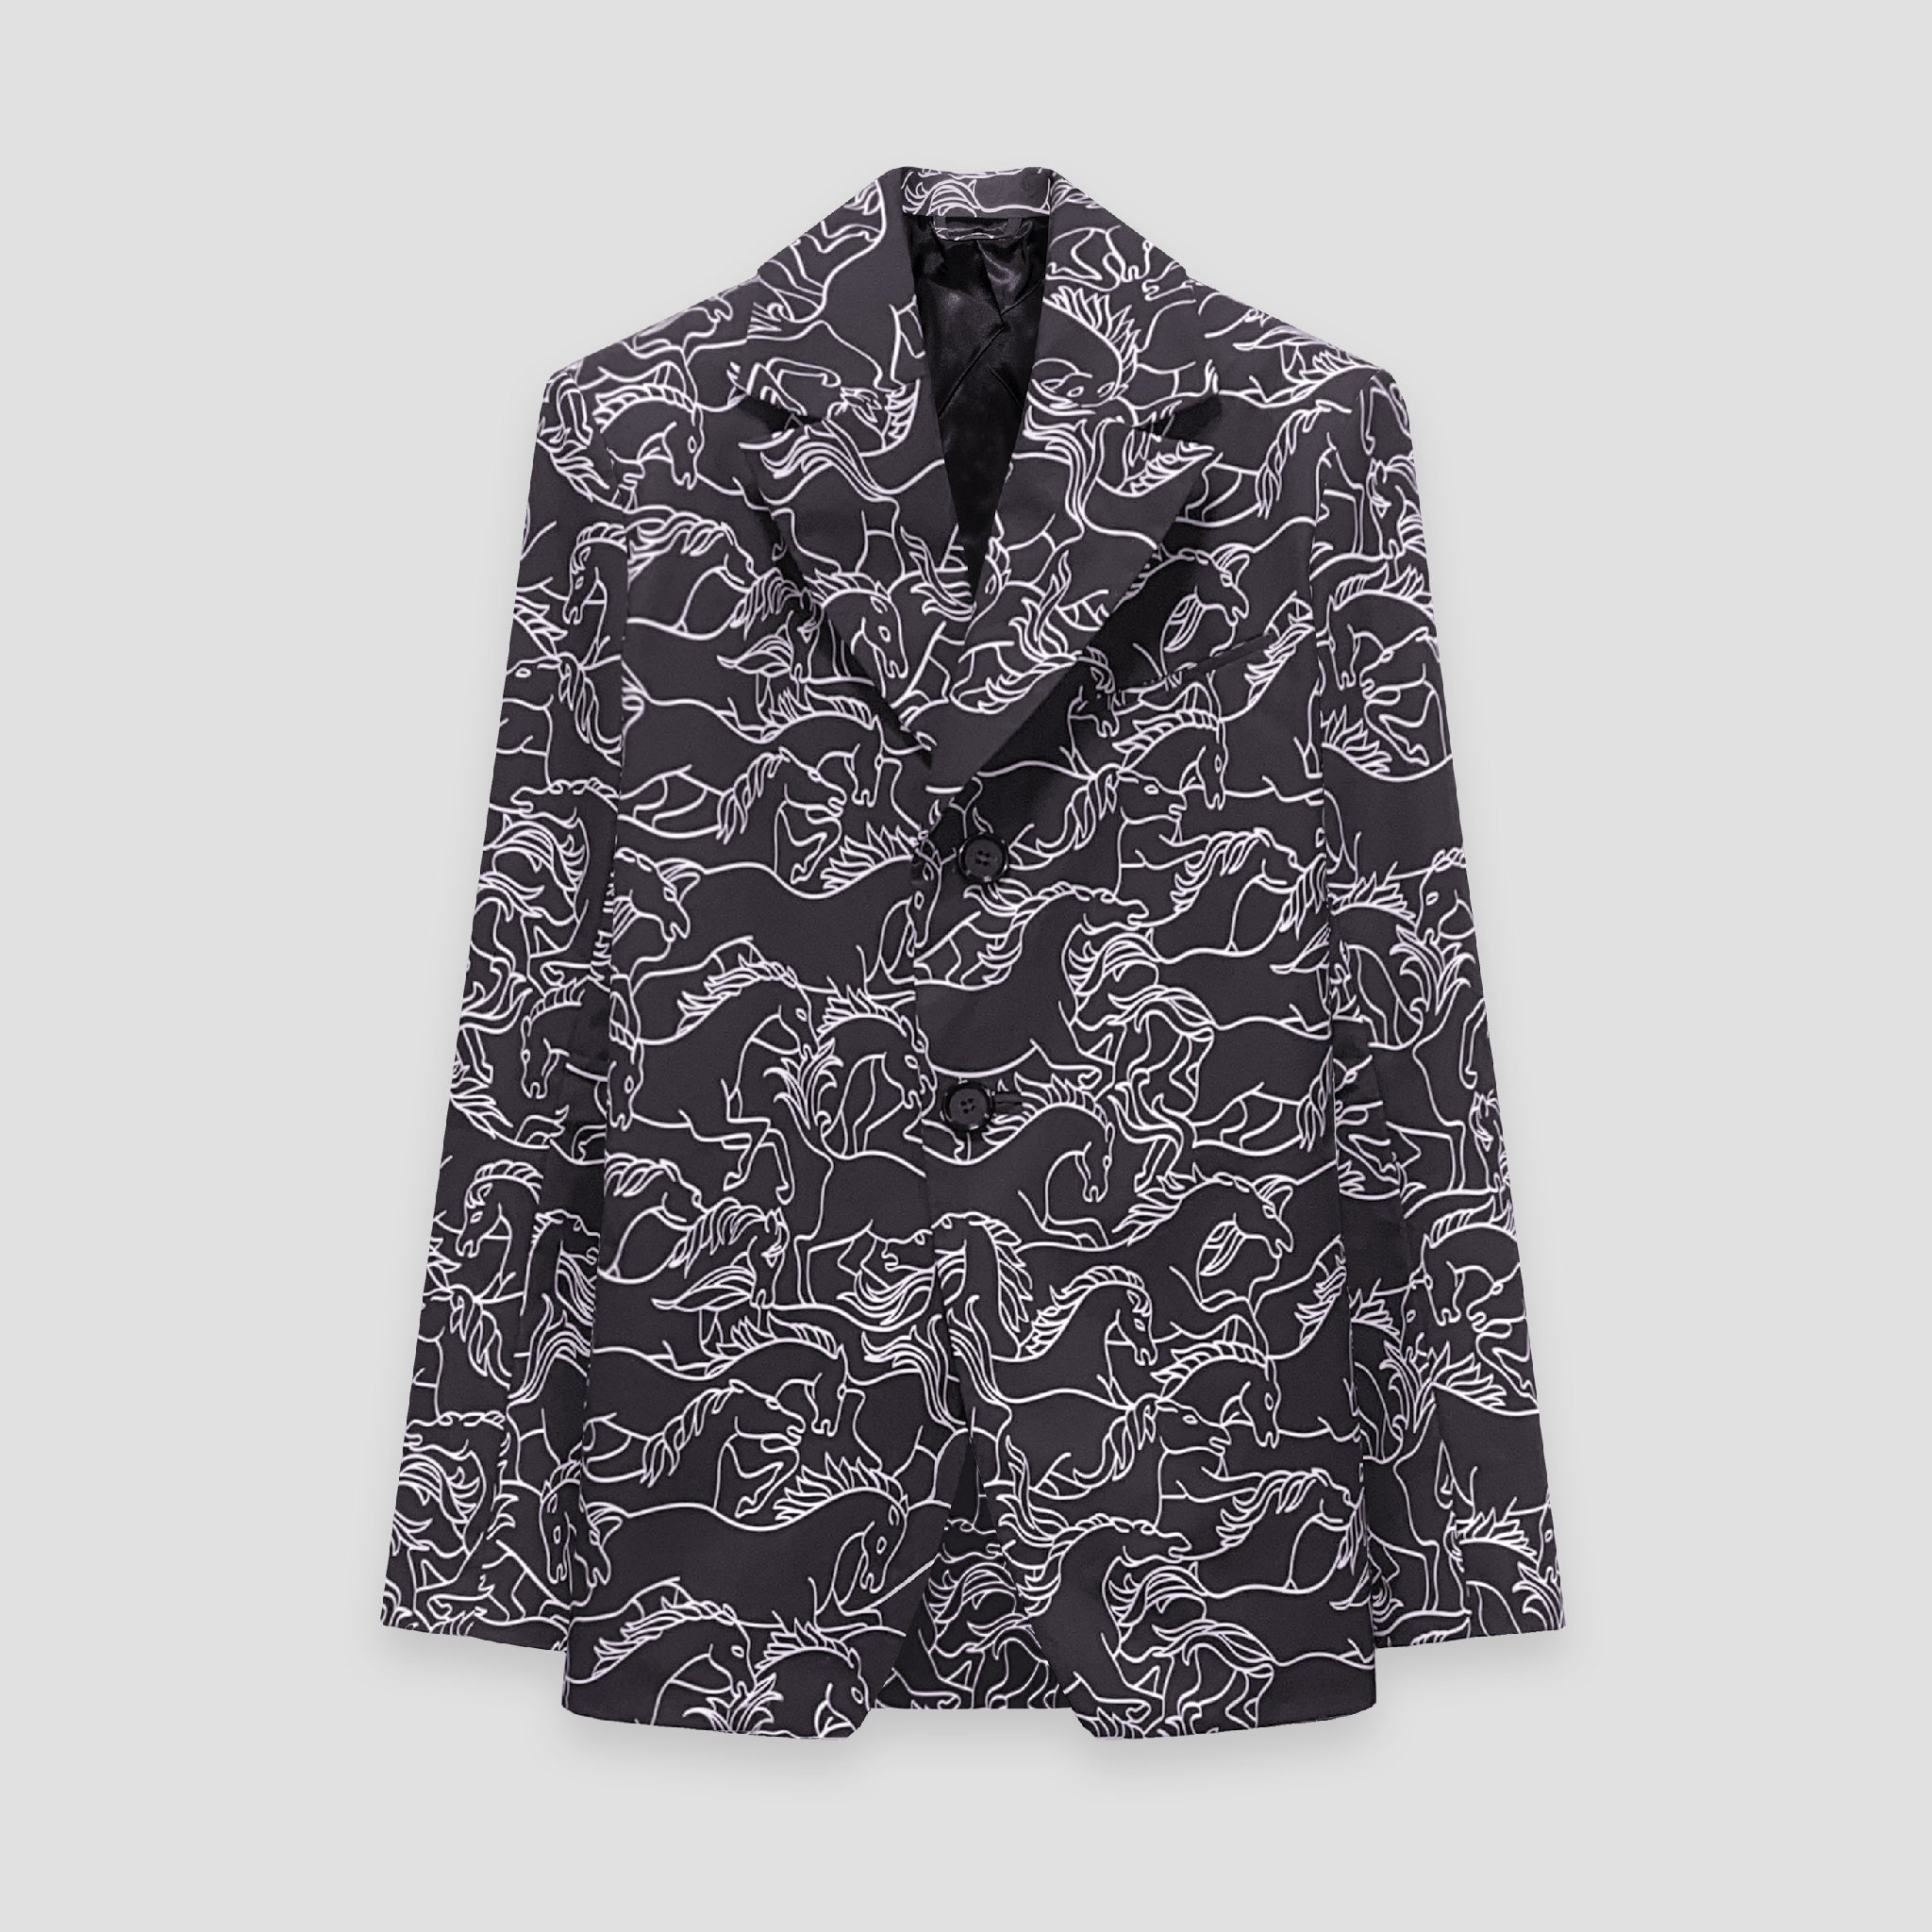 MASCULINE TAILORED JACKET WITH HORSES PRINT